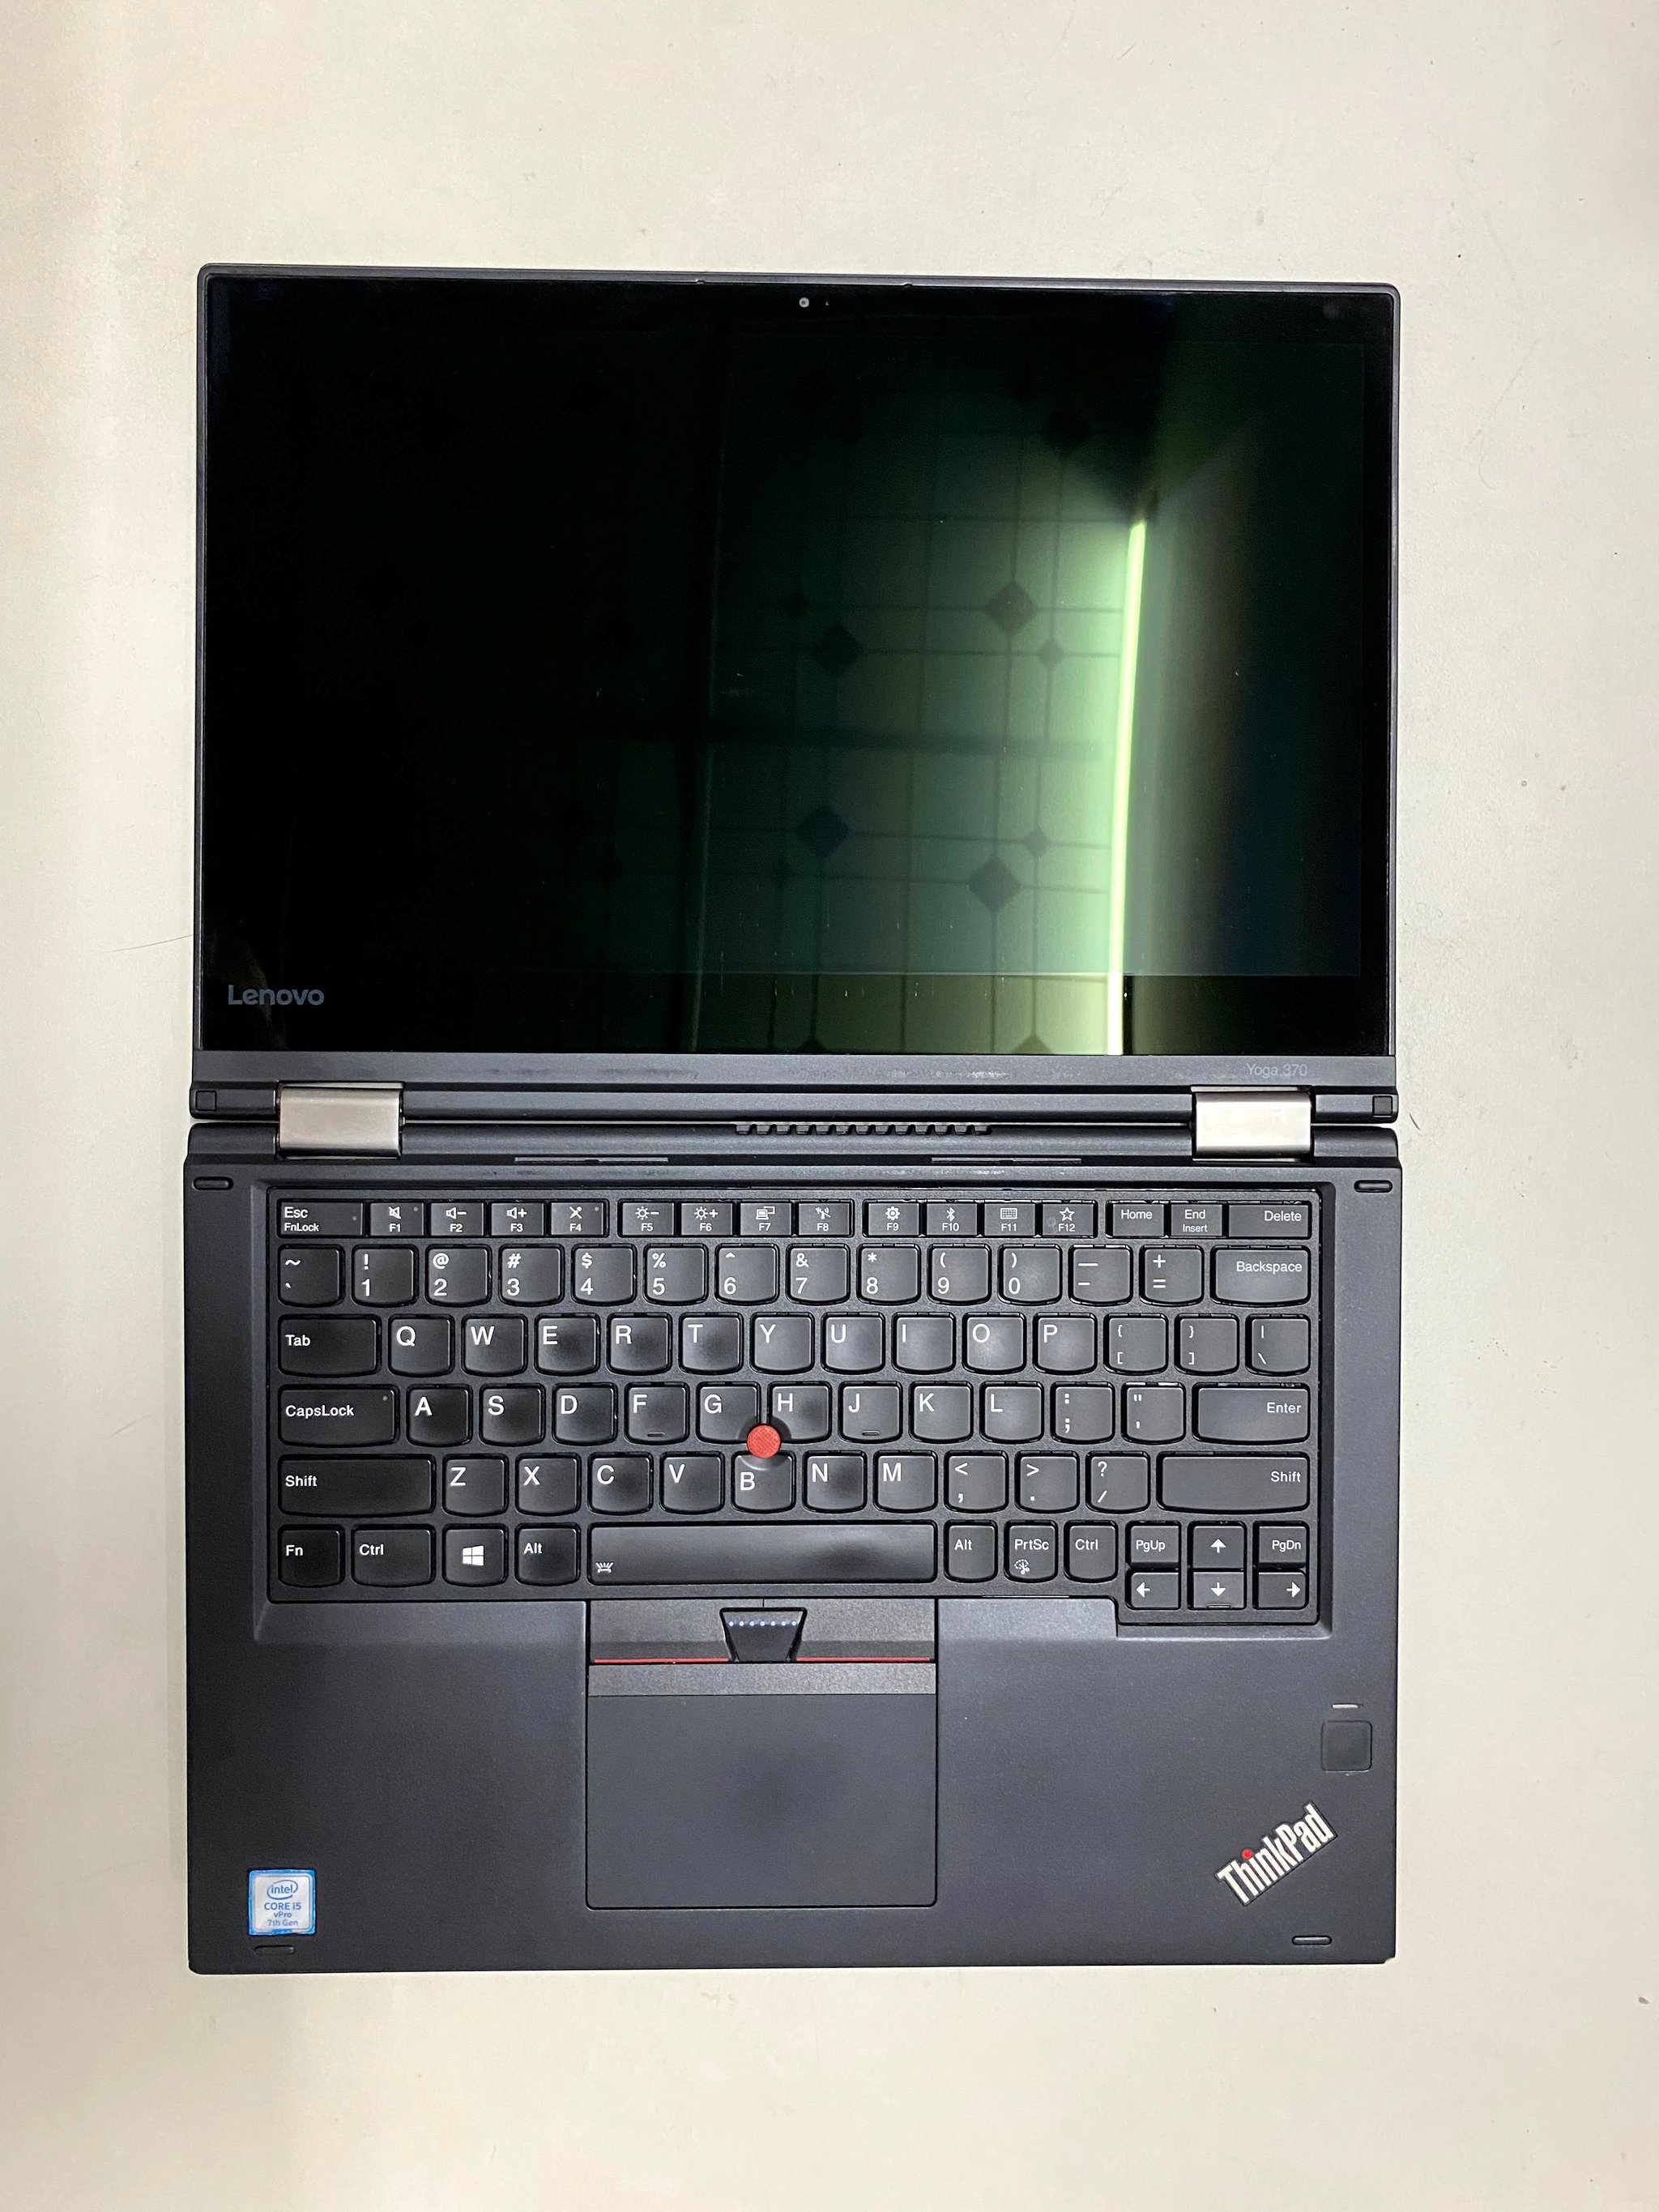 Review Yoga 370 Laptop (ThinkPad) - 2nd hand user Review